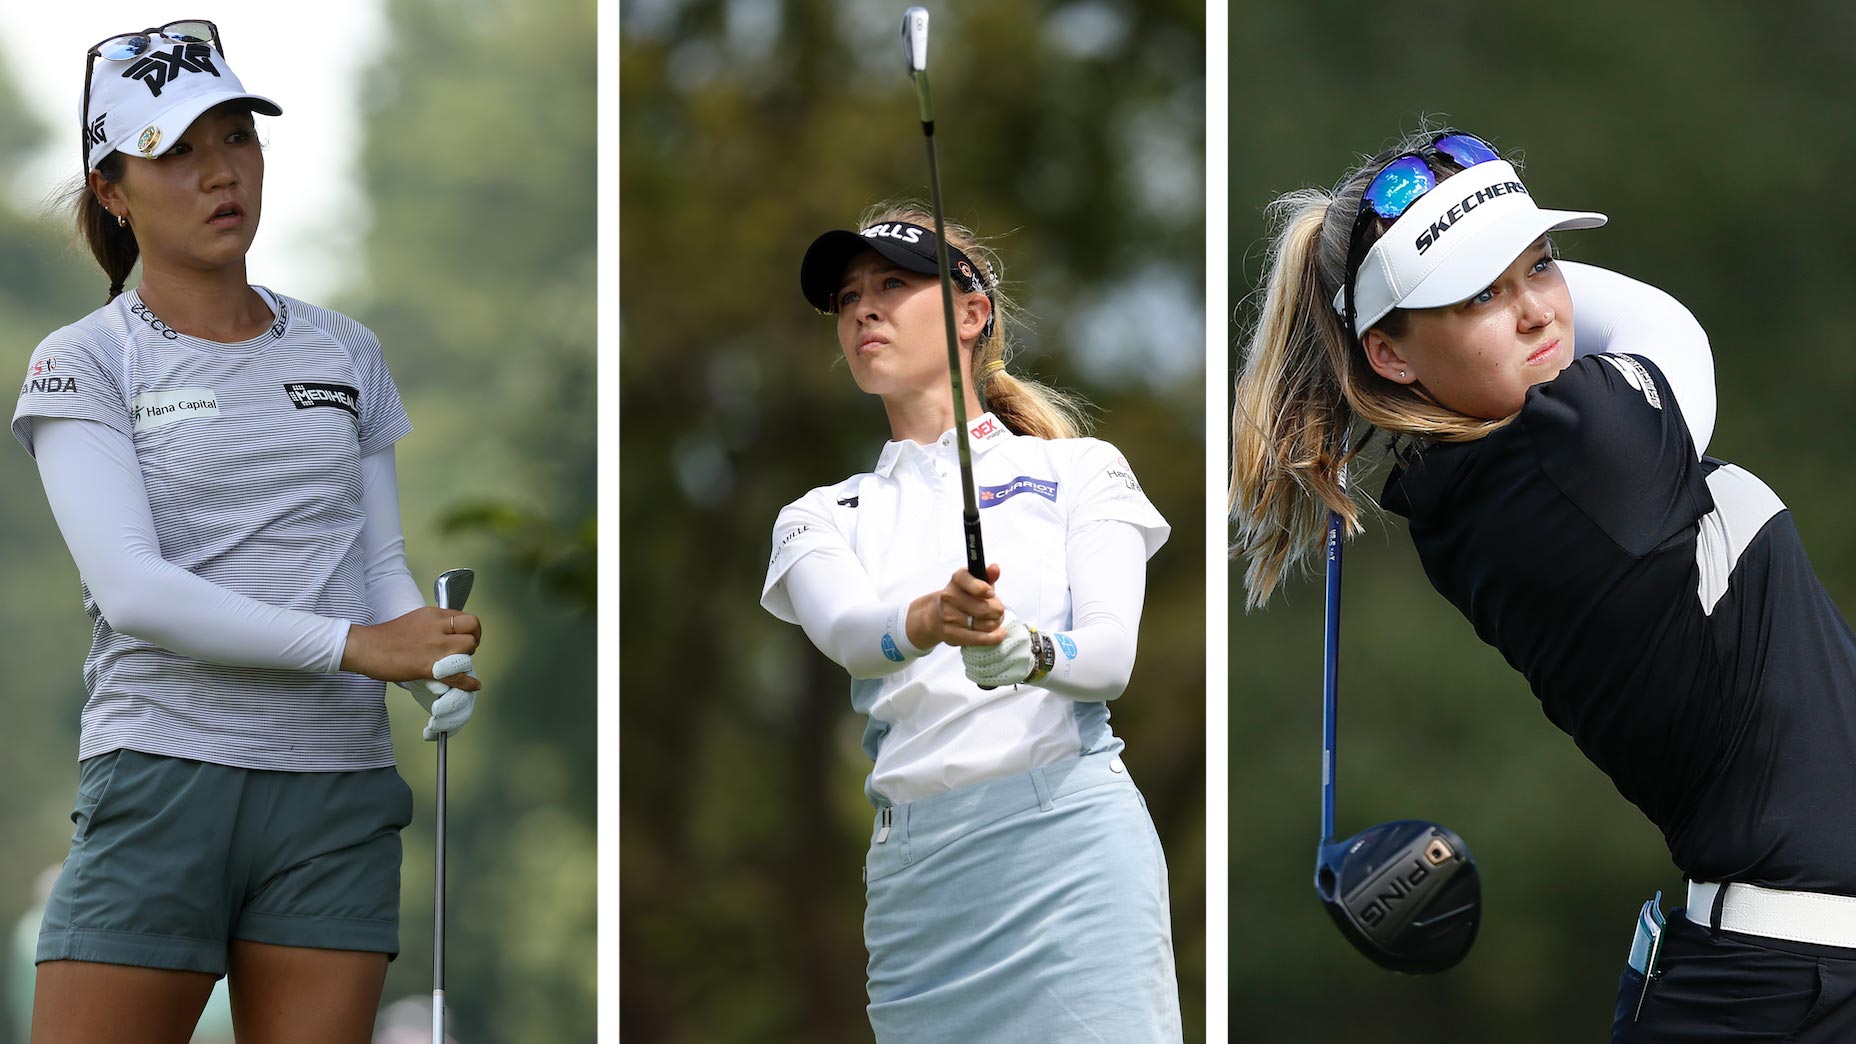 Ugyldigt At accelerere Fængsling These are the 10 best female golfers under the age of 25